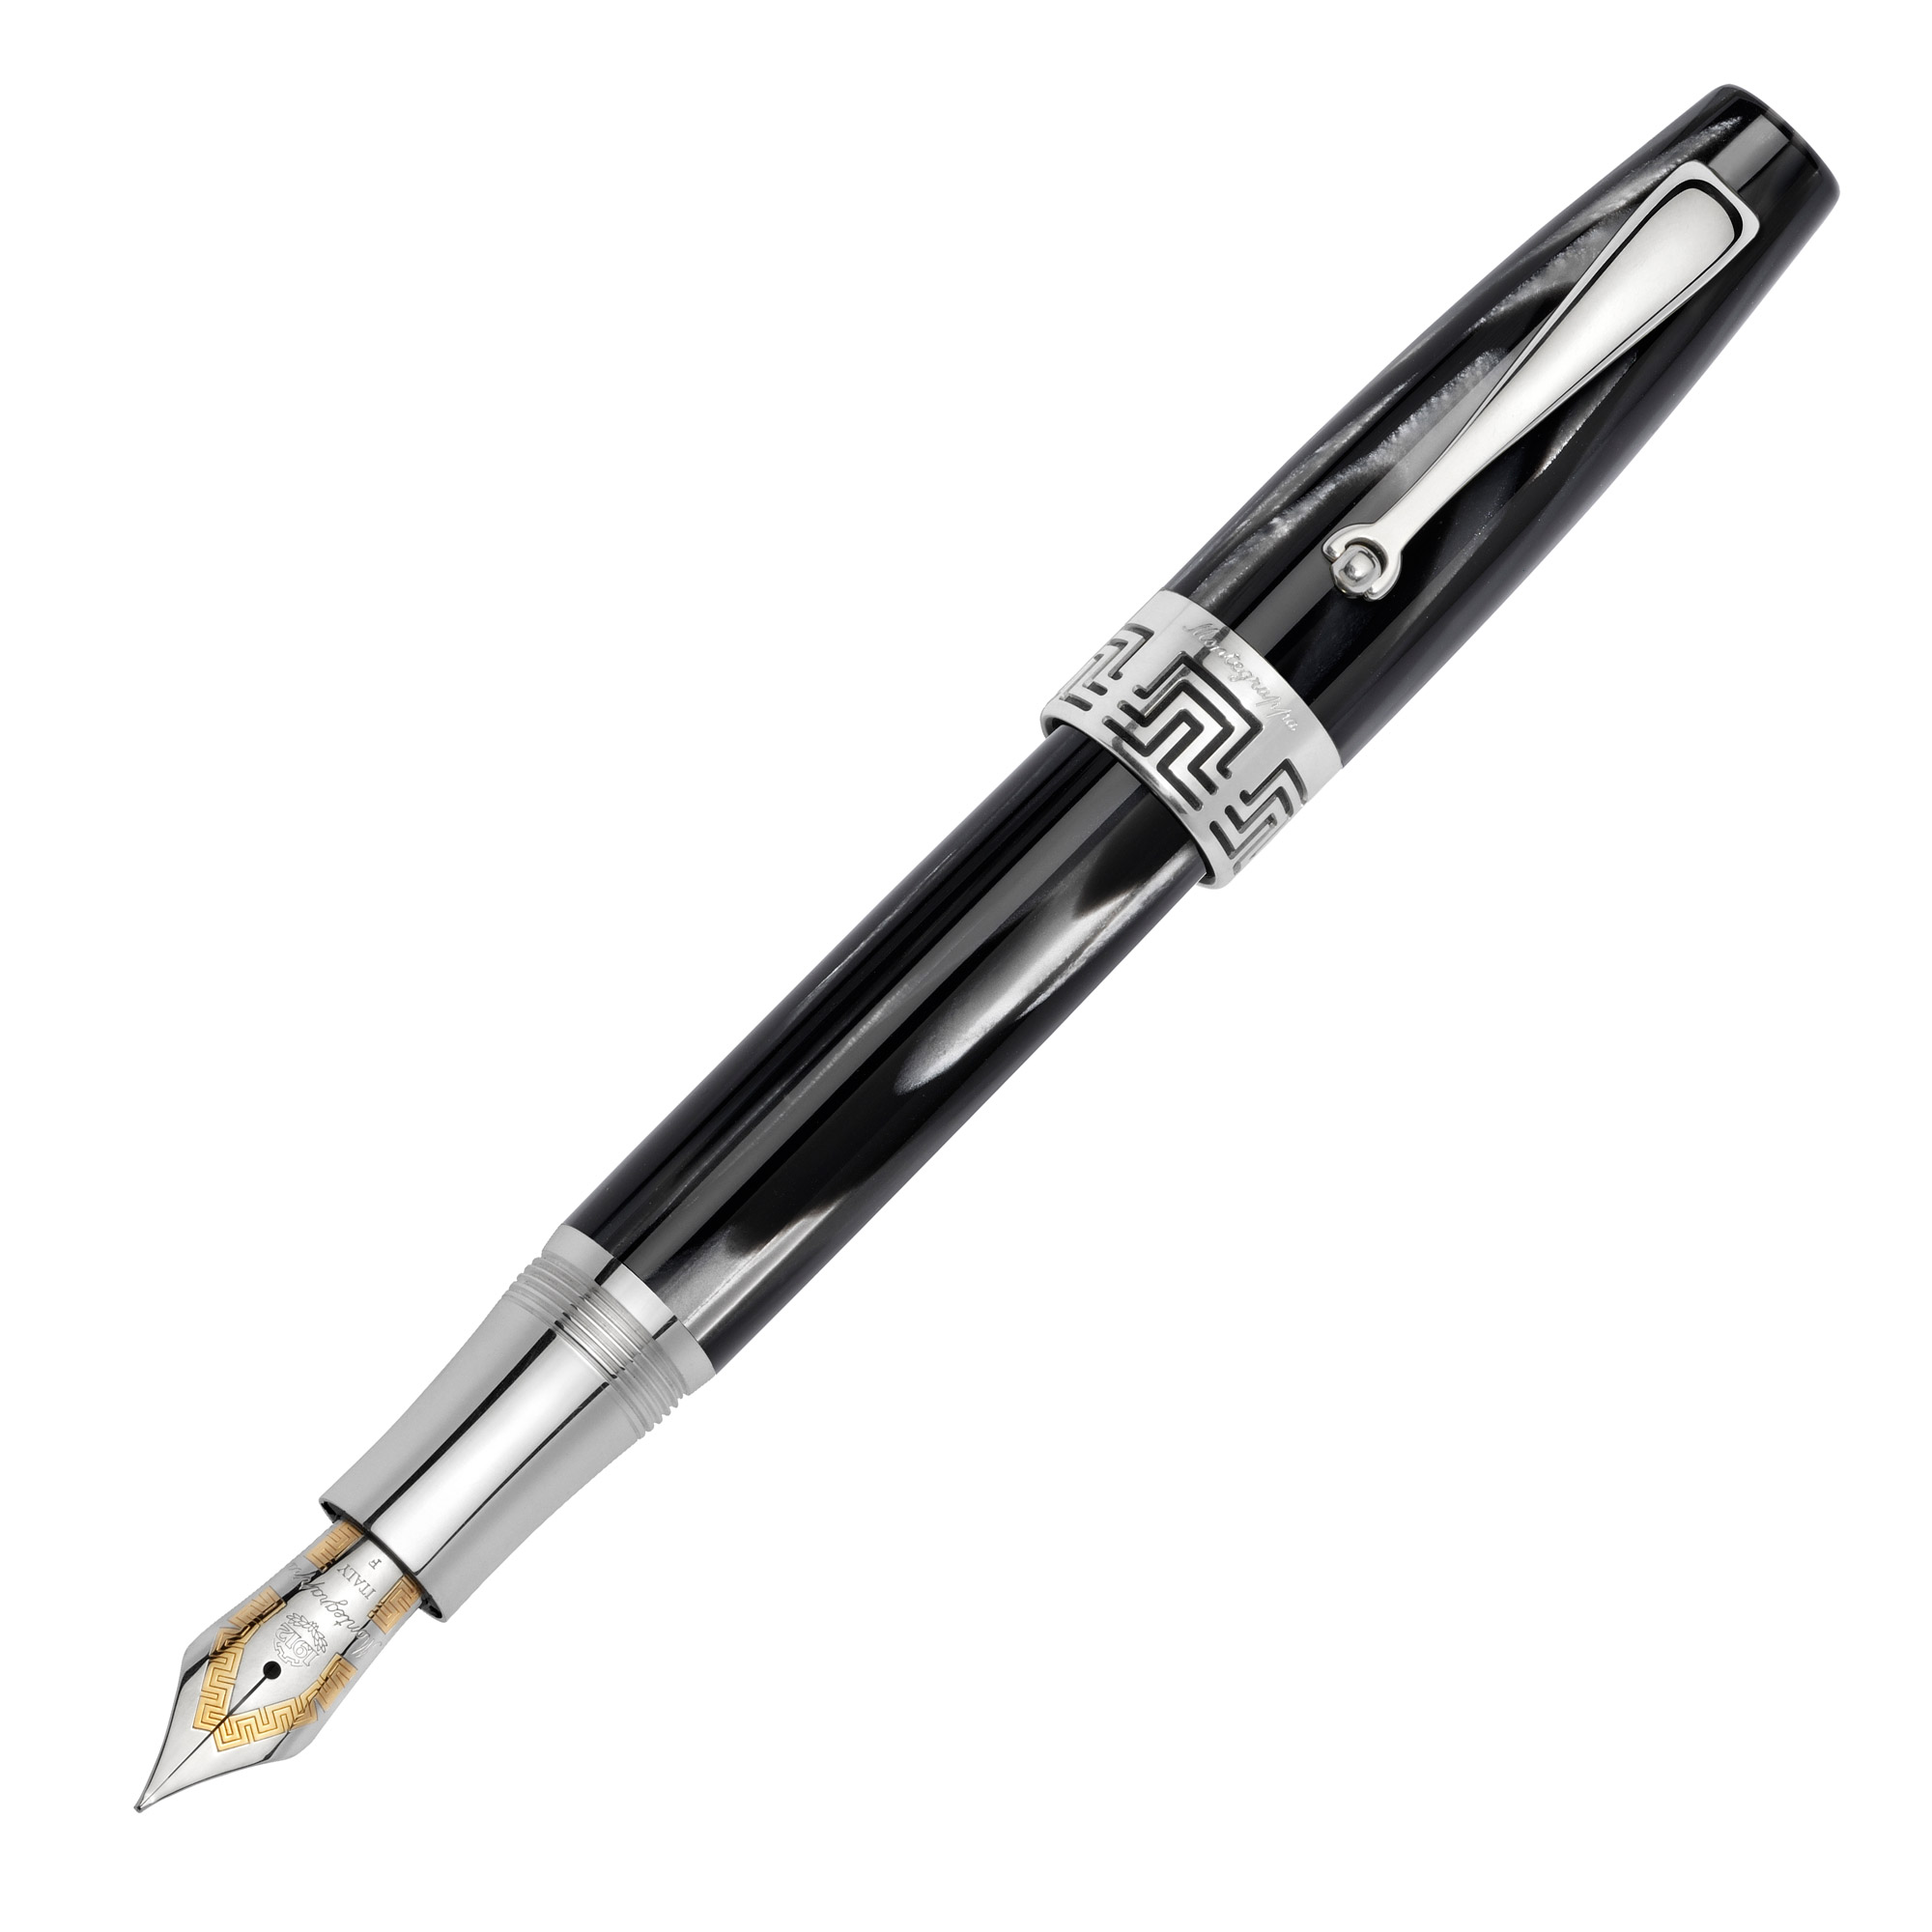 How to Reach the Pinnacle in Branding - Montblanc